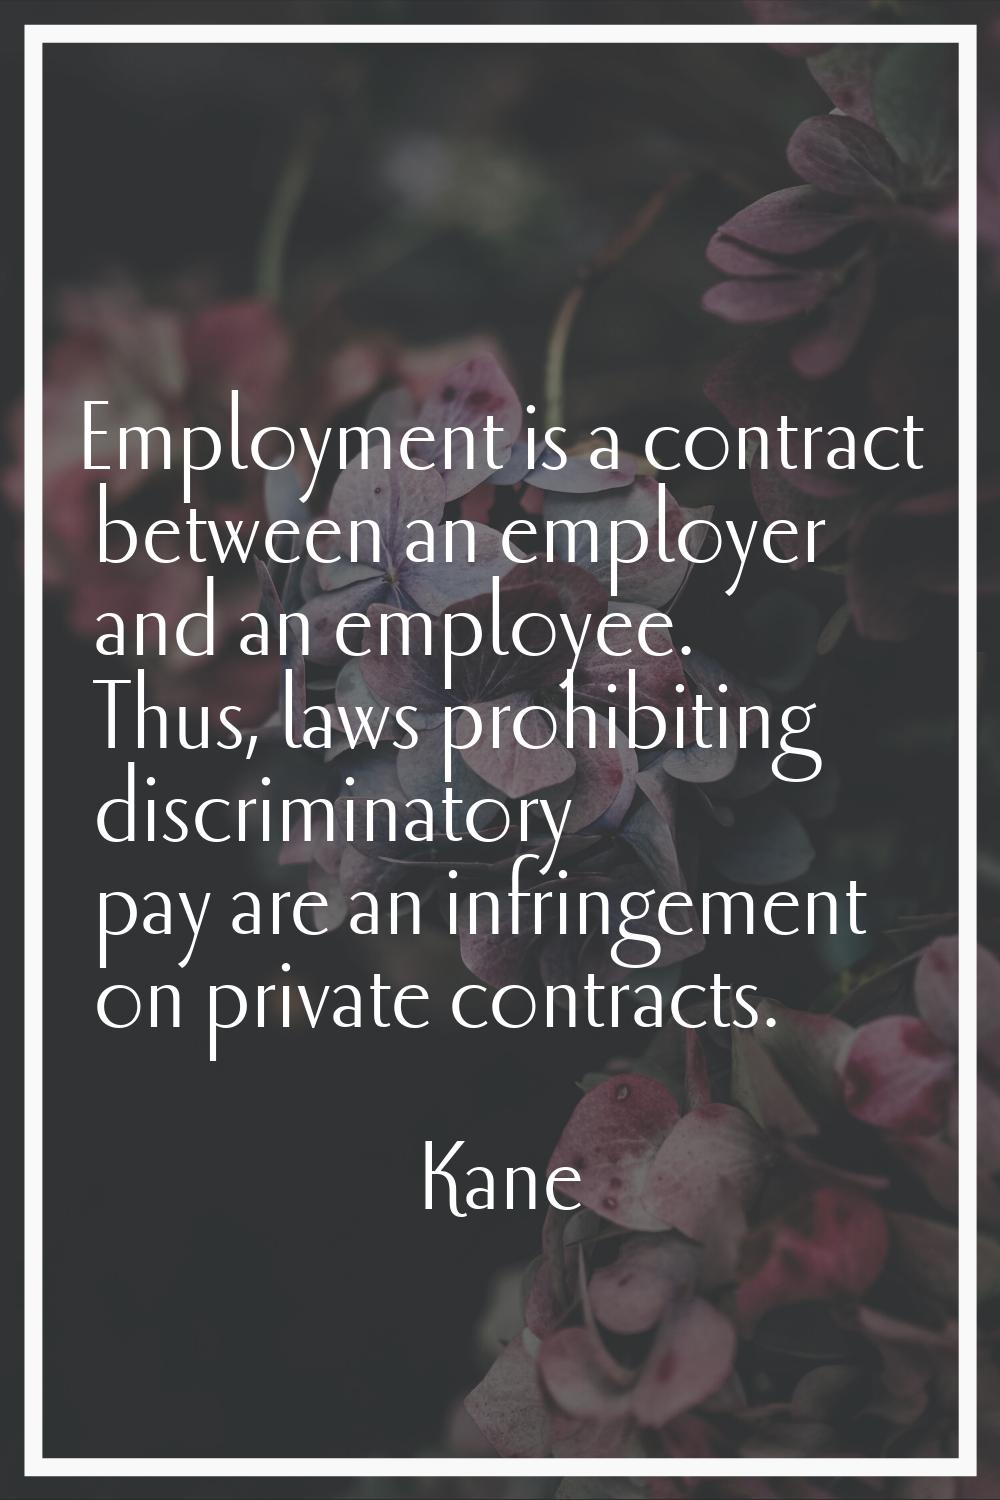 Employment is a contract between an employer and an employee. Thus, laws prohibiting discriminatory